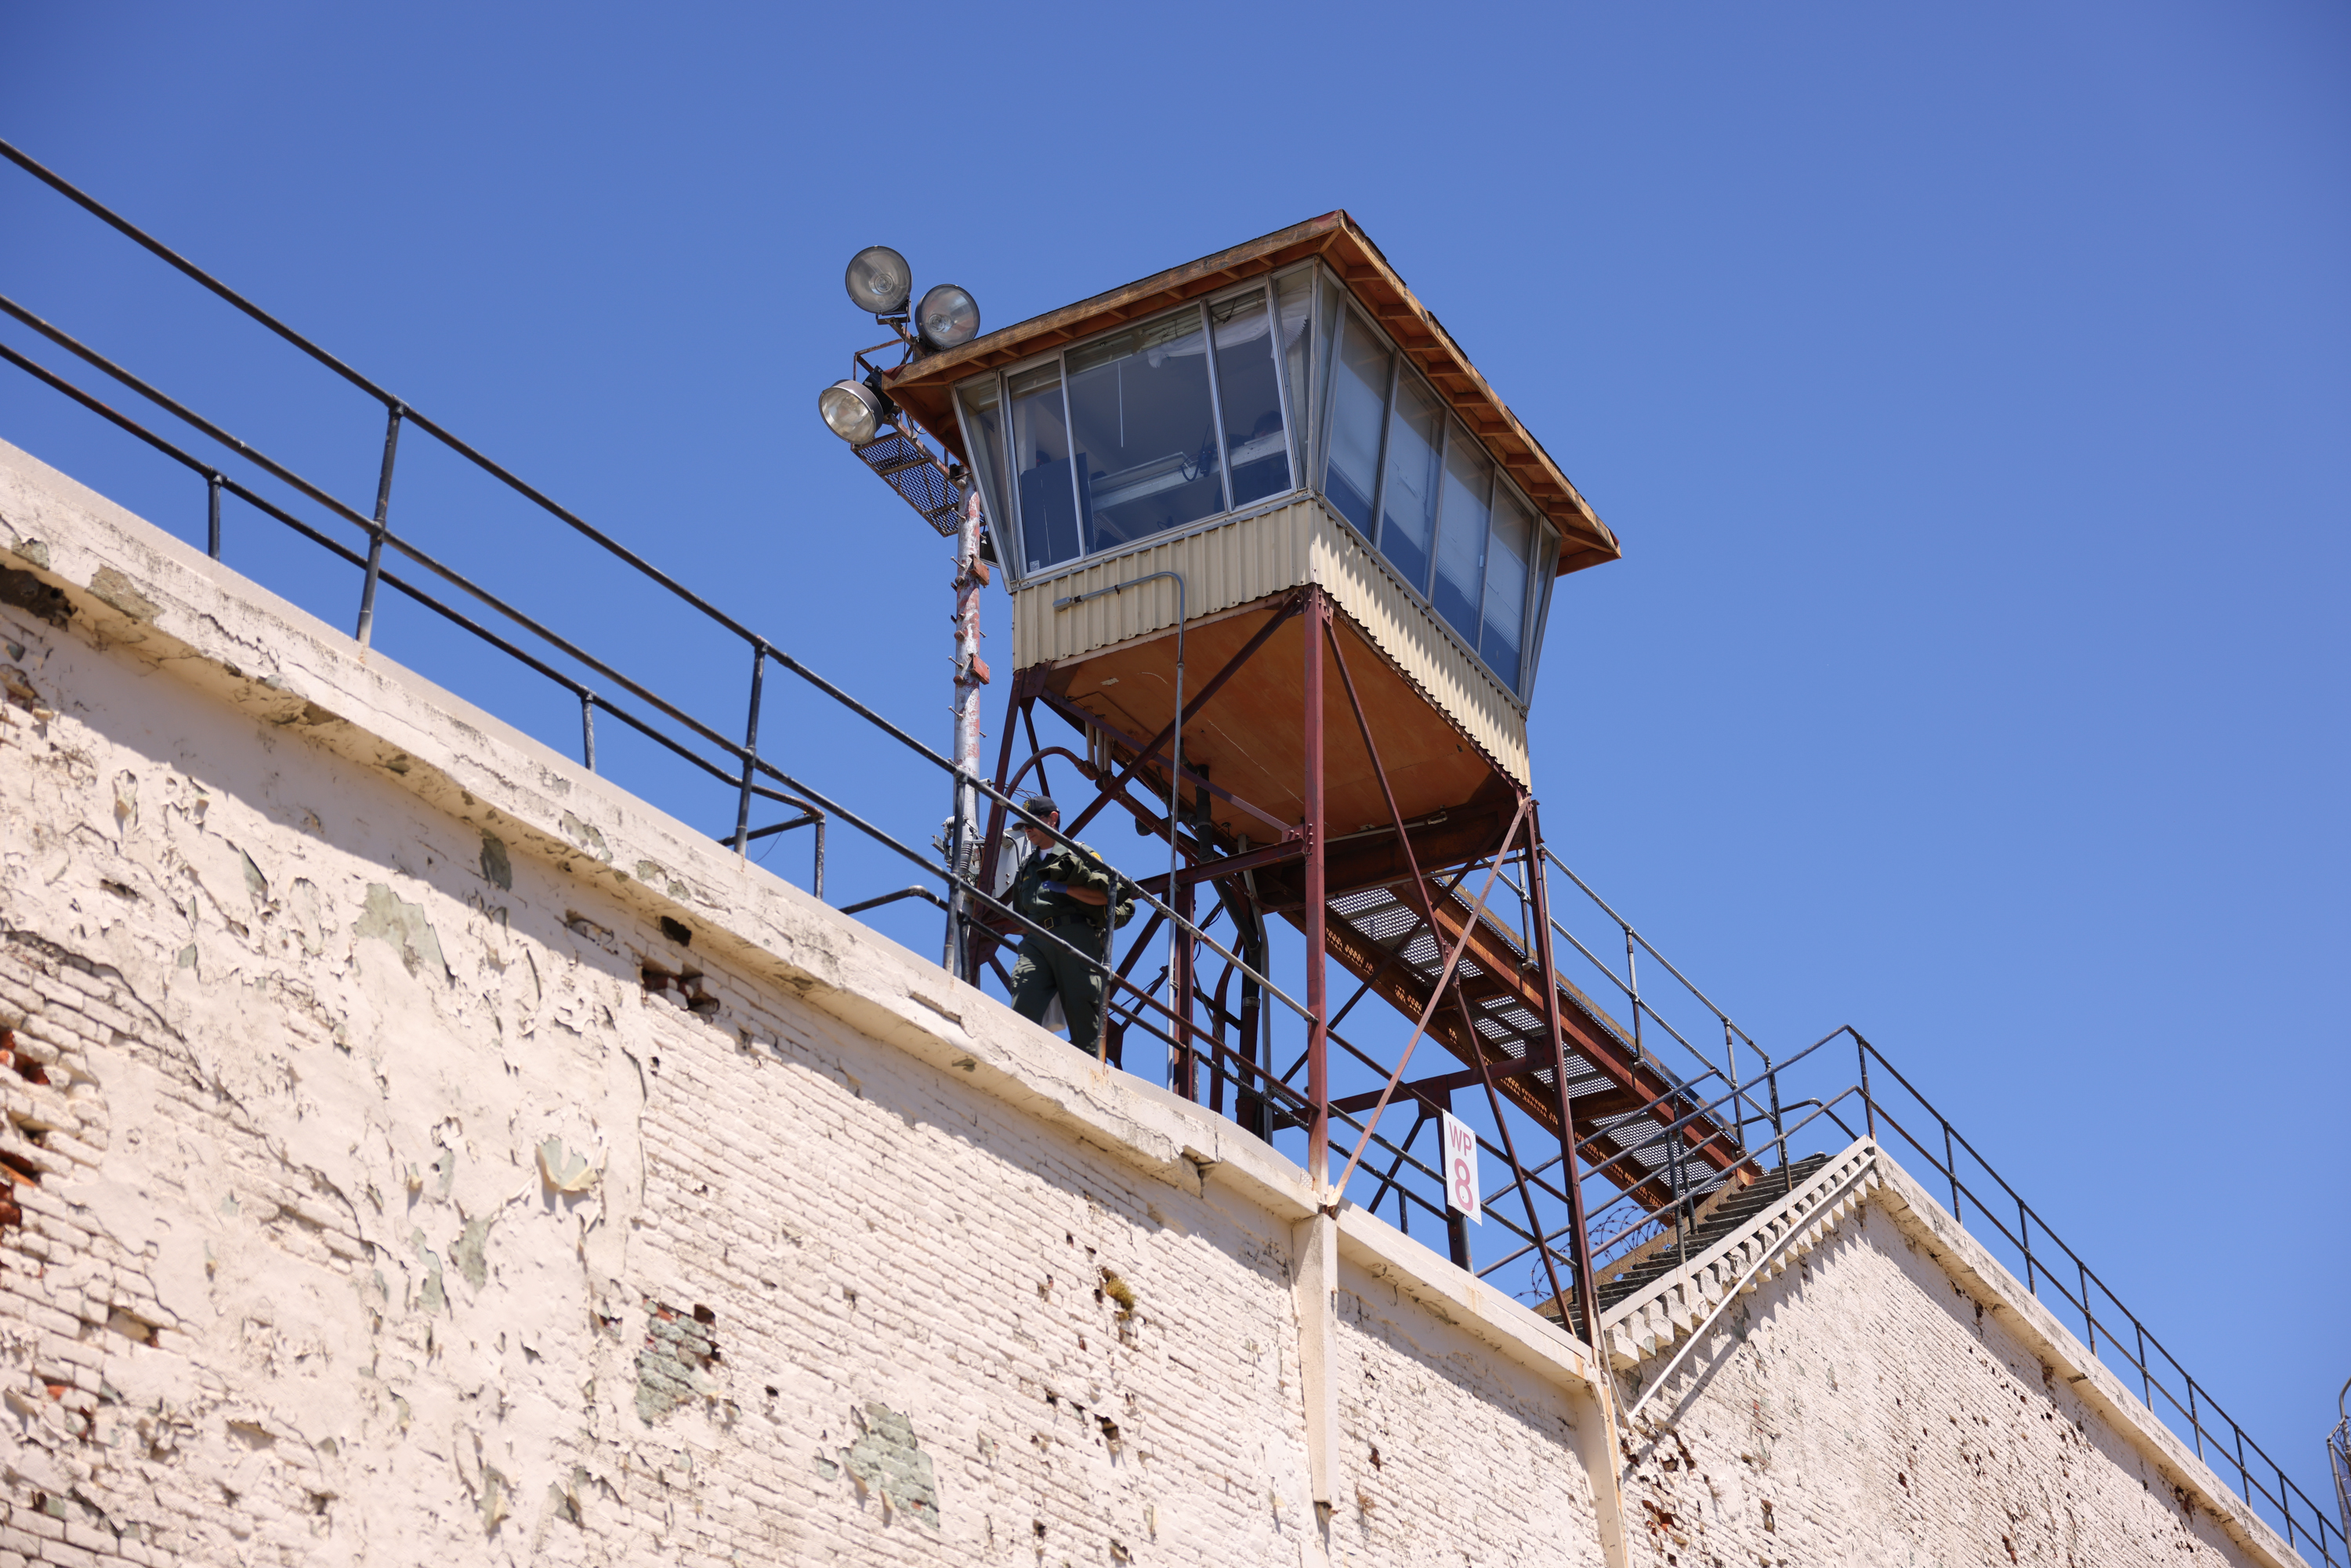 A weathered guard tower atop a high wall with stairs, against a clear blue sky.